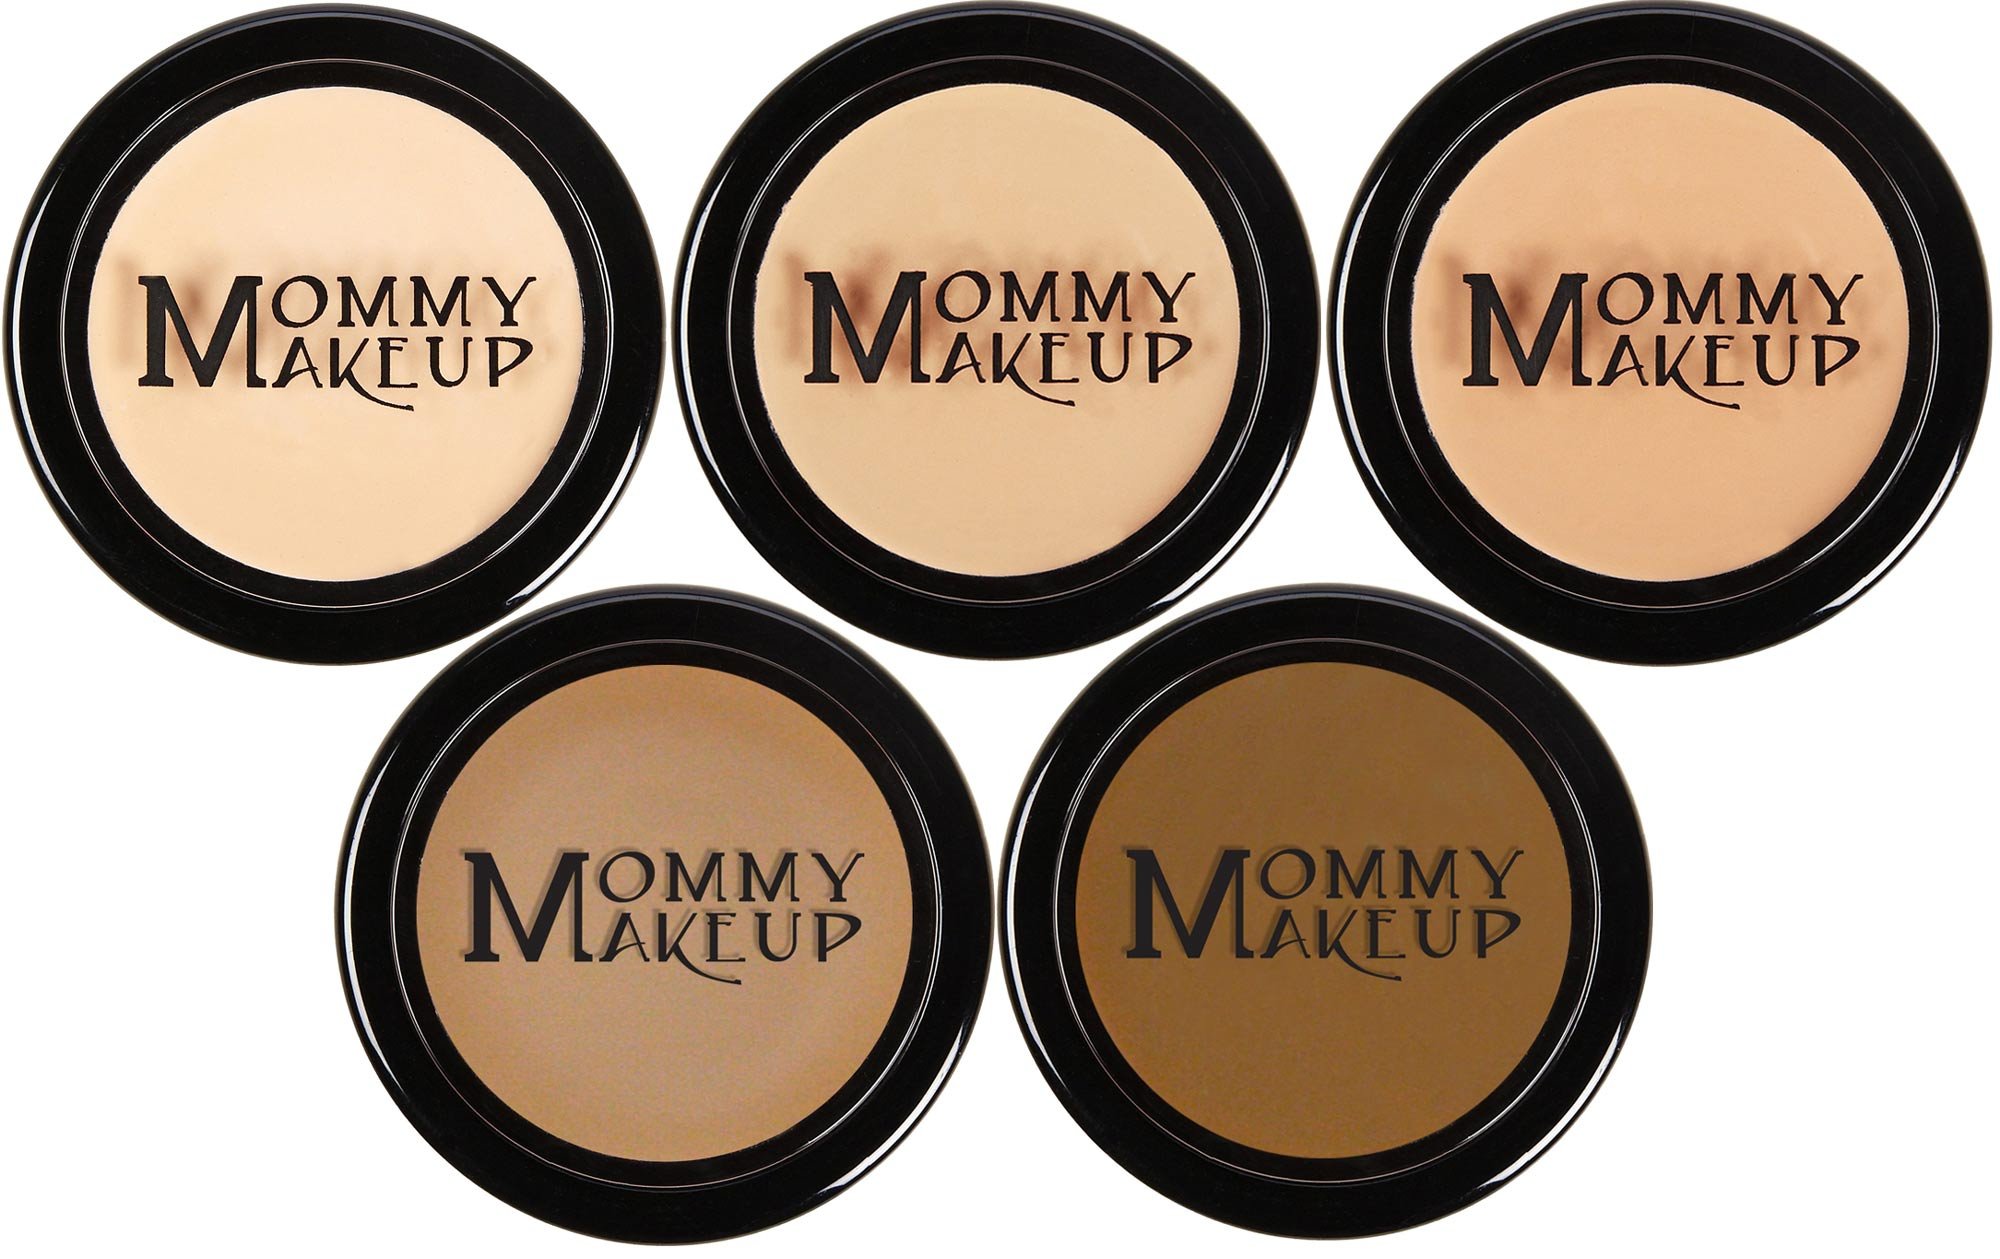 Mommy's Little Helper Concealer - Under Eye Concealer/Face Coverup/Eyeshadow Base. Hide blemishes and imperfections. Oil-free, Talc-free, Paraben-free, PTFE-free, Made in USA. [RESTED - Medium]